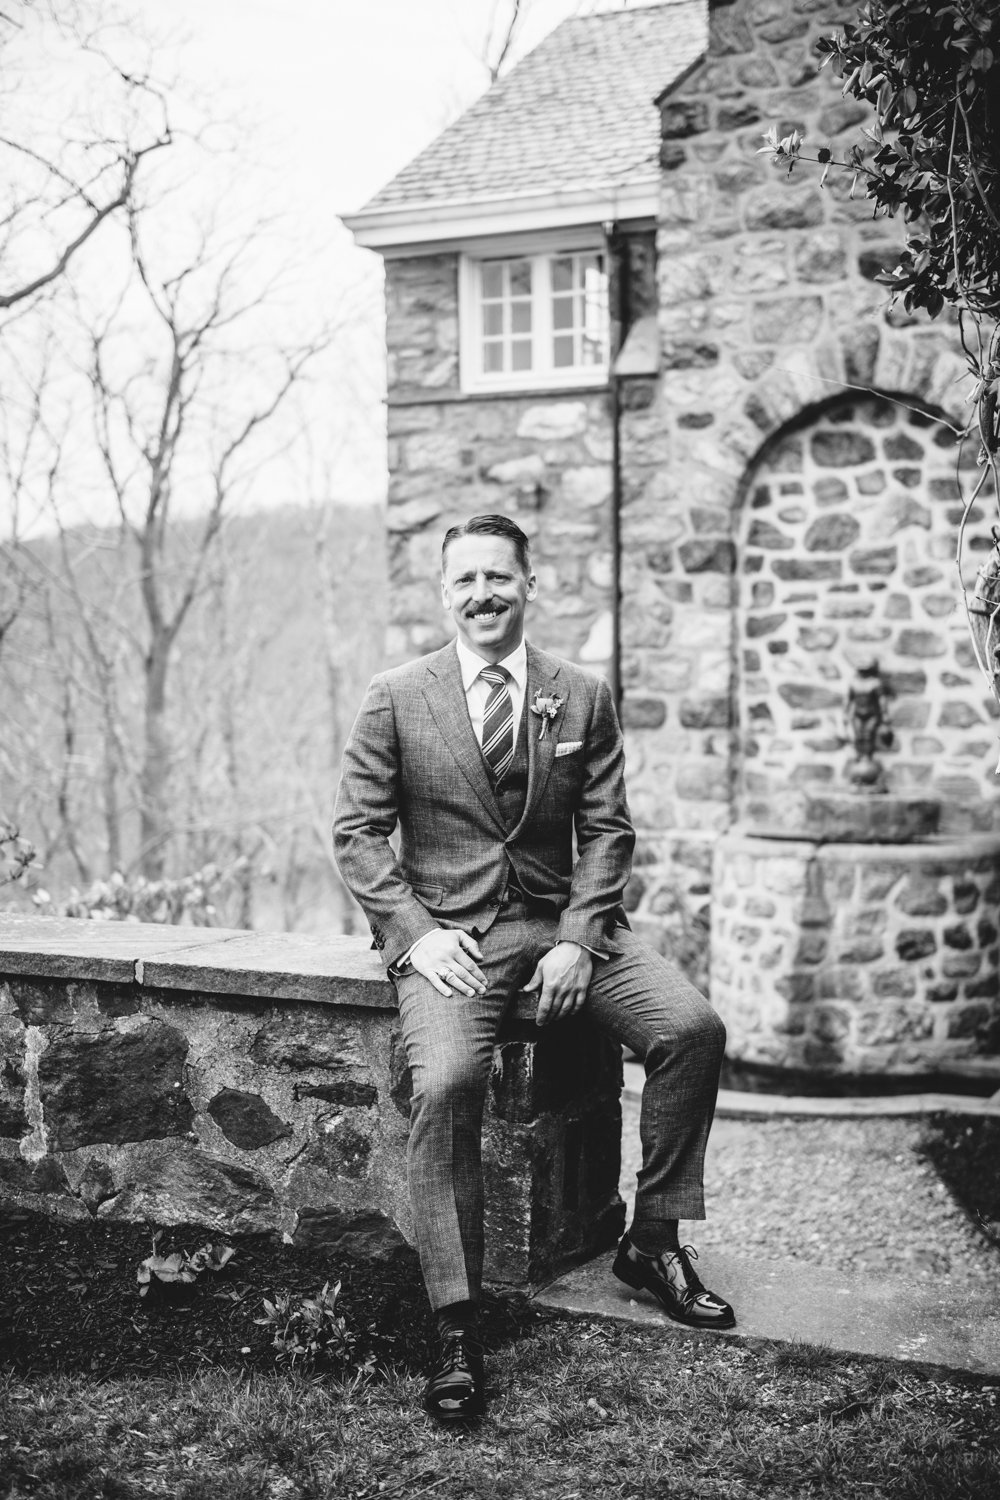 Groom sits on a stone wall in front of a stone building and smiles.

Upstate New York Wedding Photography. Cold Spring NY Wedding Photography. Luxury Local Wedding Photographer. Destination Wedding Photographer.